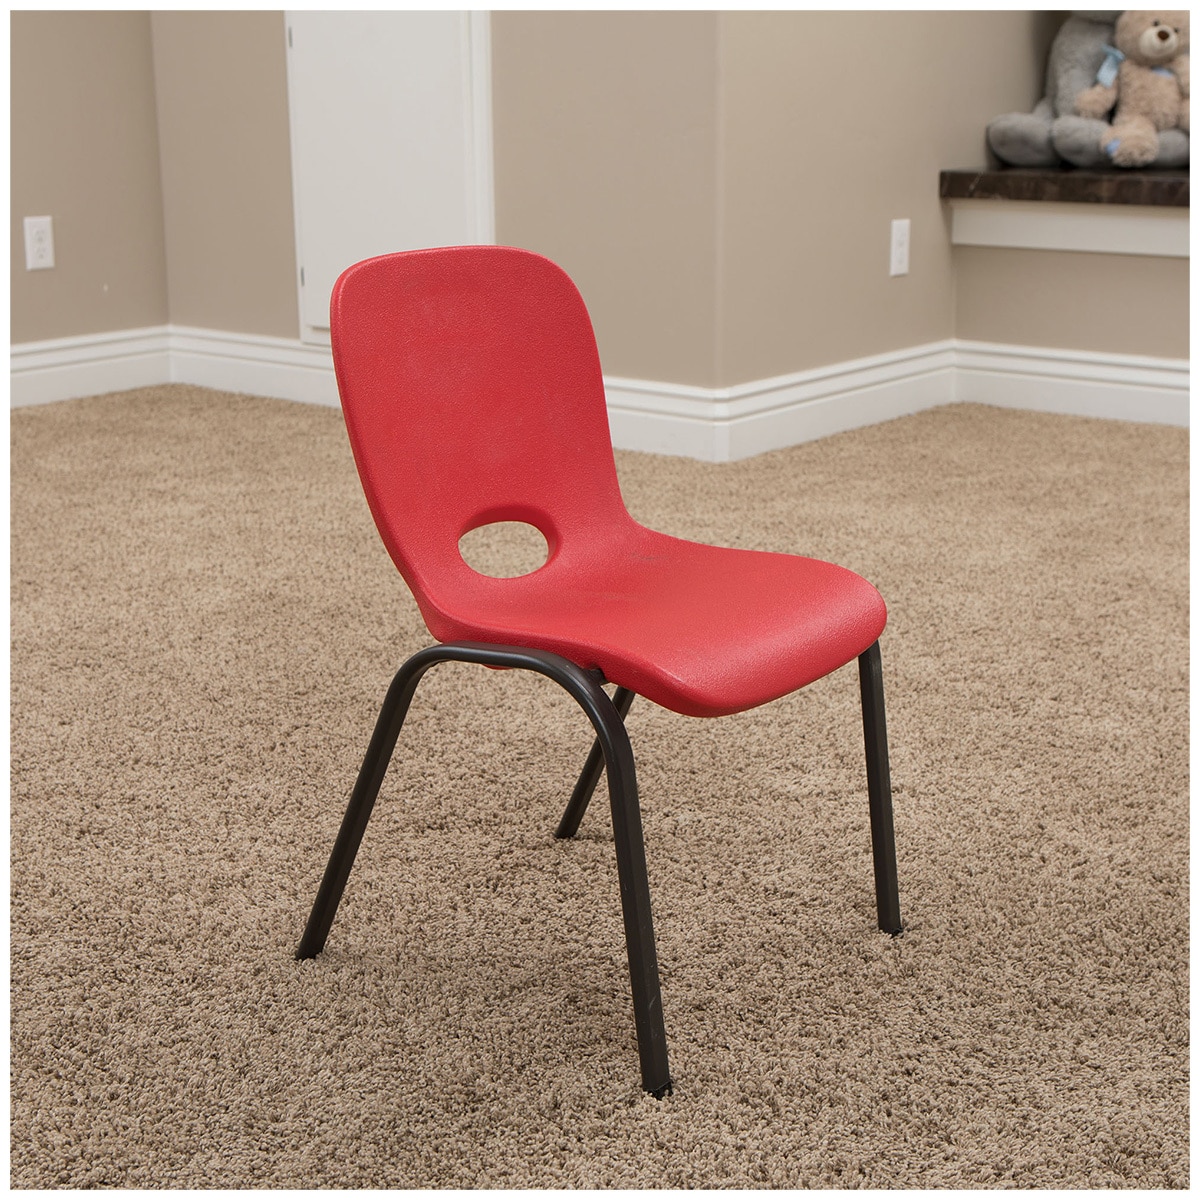 Lifetime Kids Stacking Chairs - Fire Red